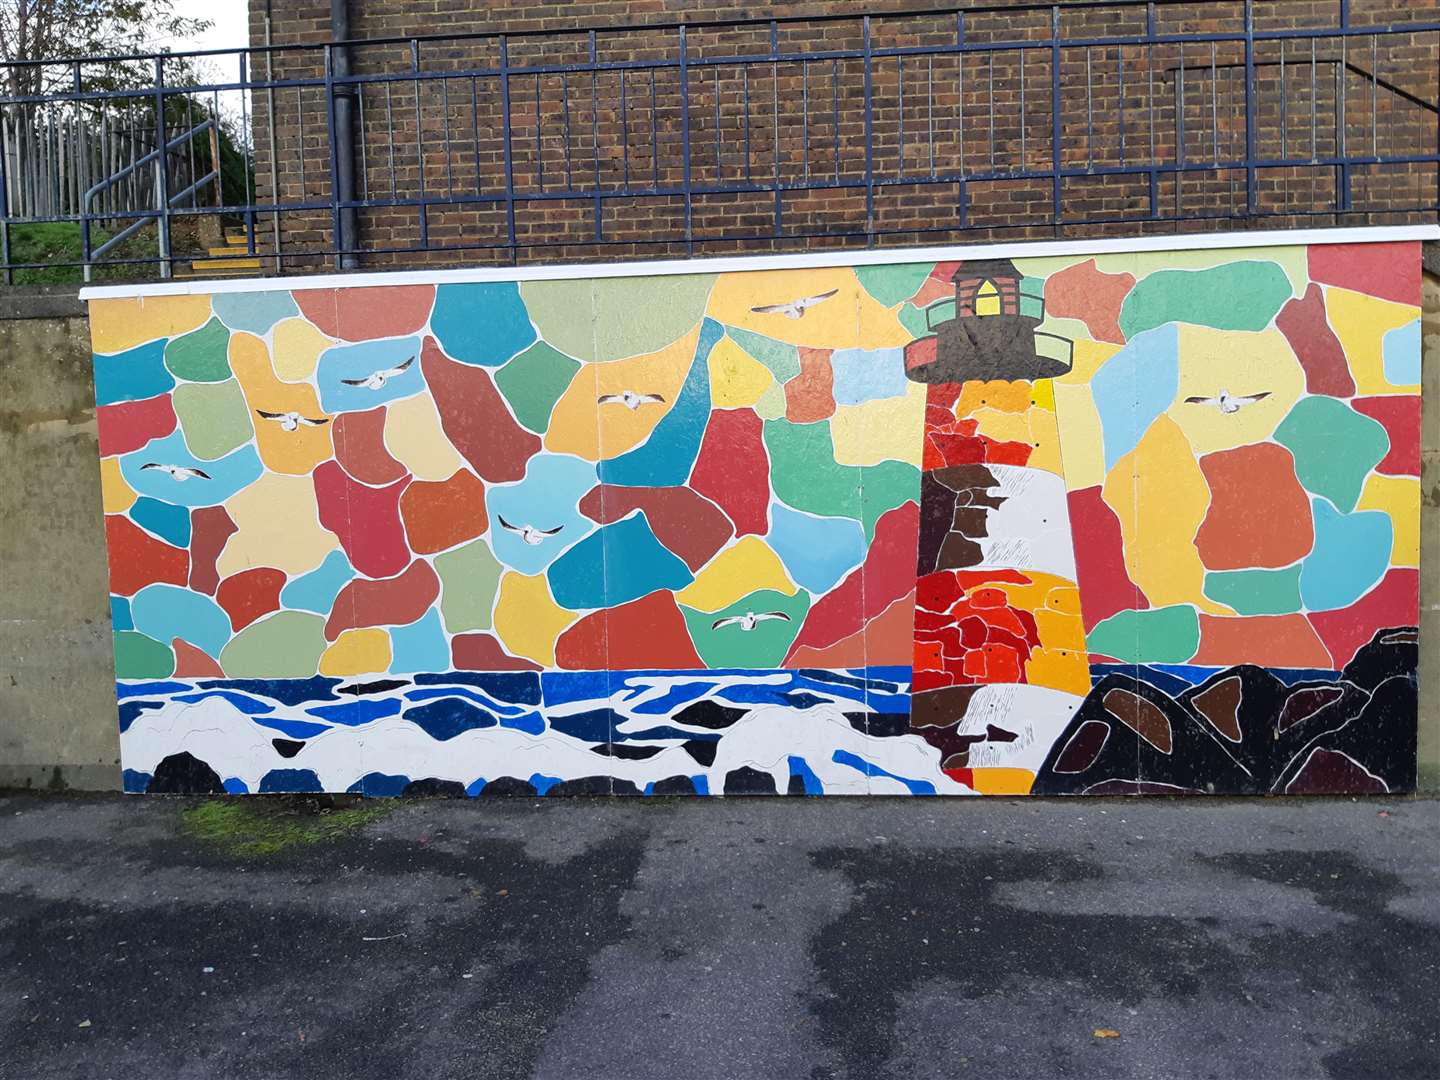 The mural for Kelly